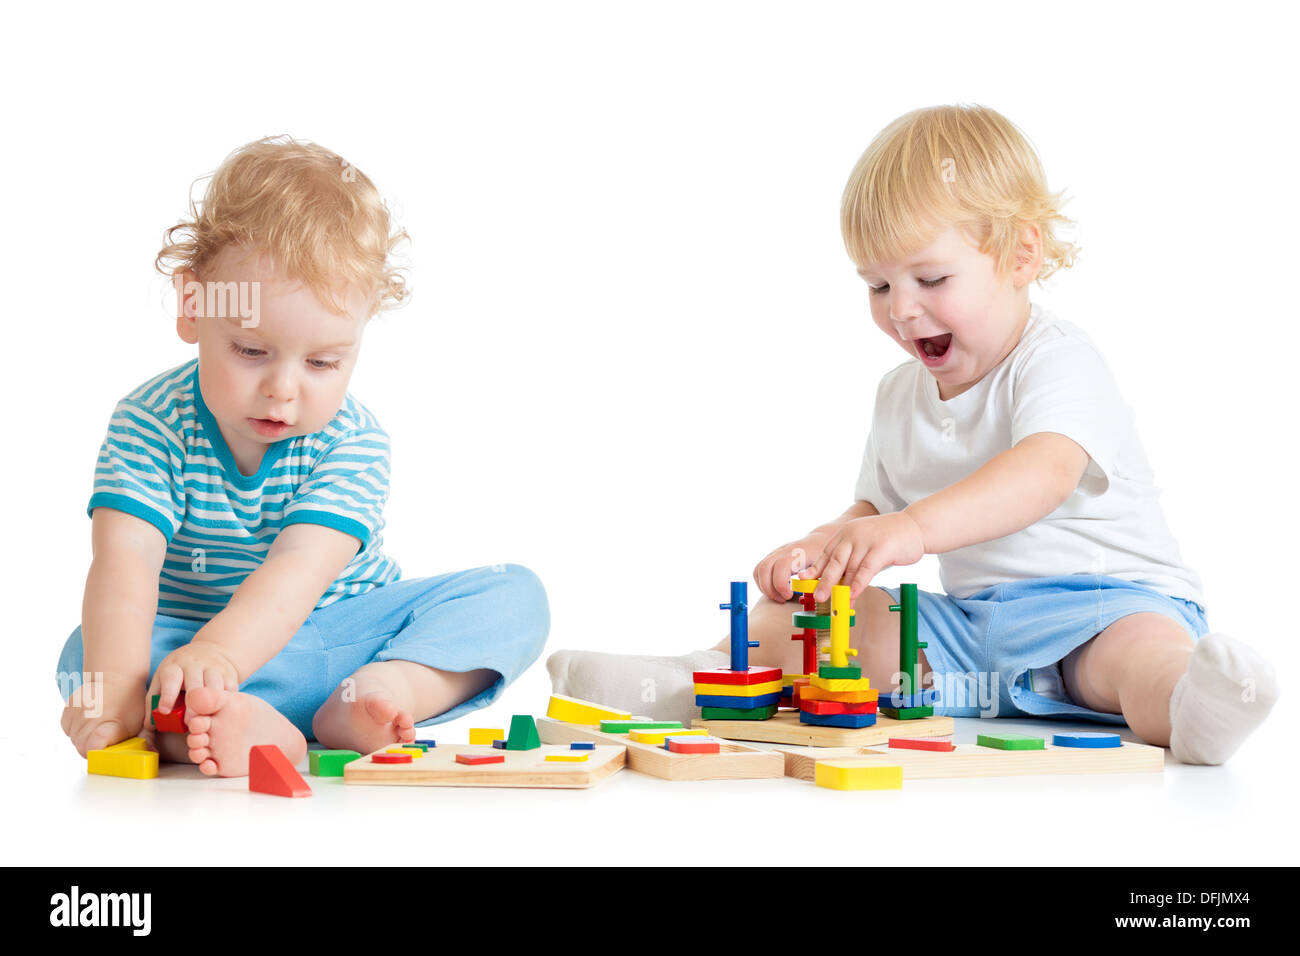 Concentrated child playing logical education toys with great interest on white background Stock Photo